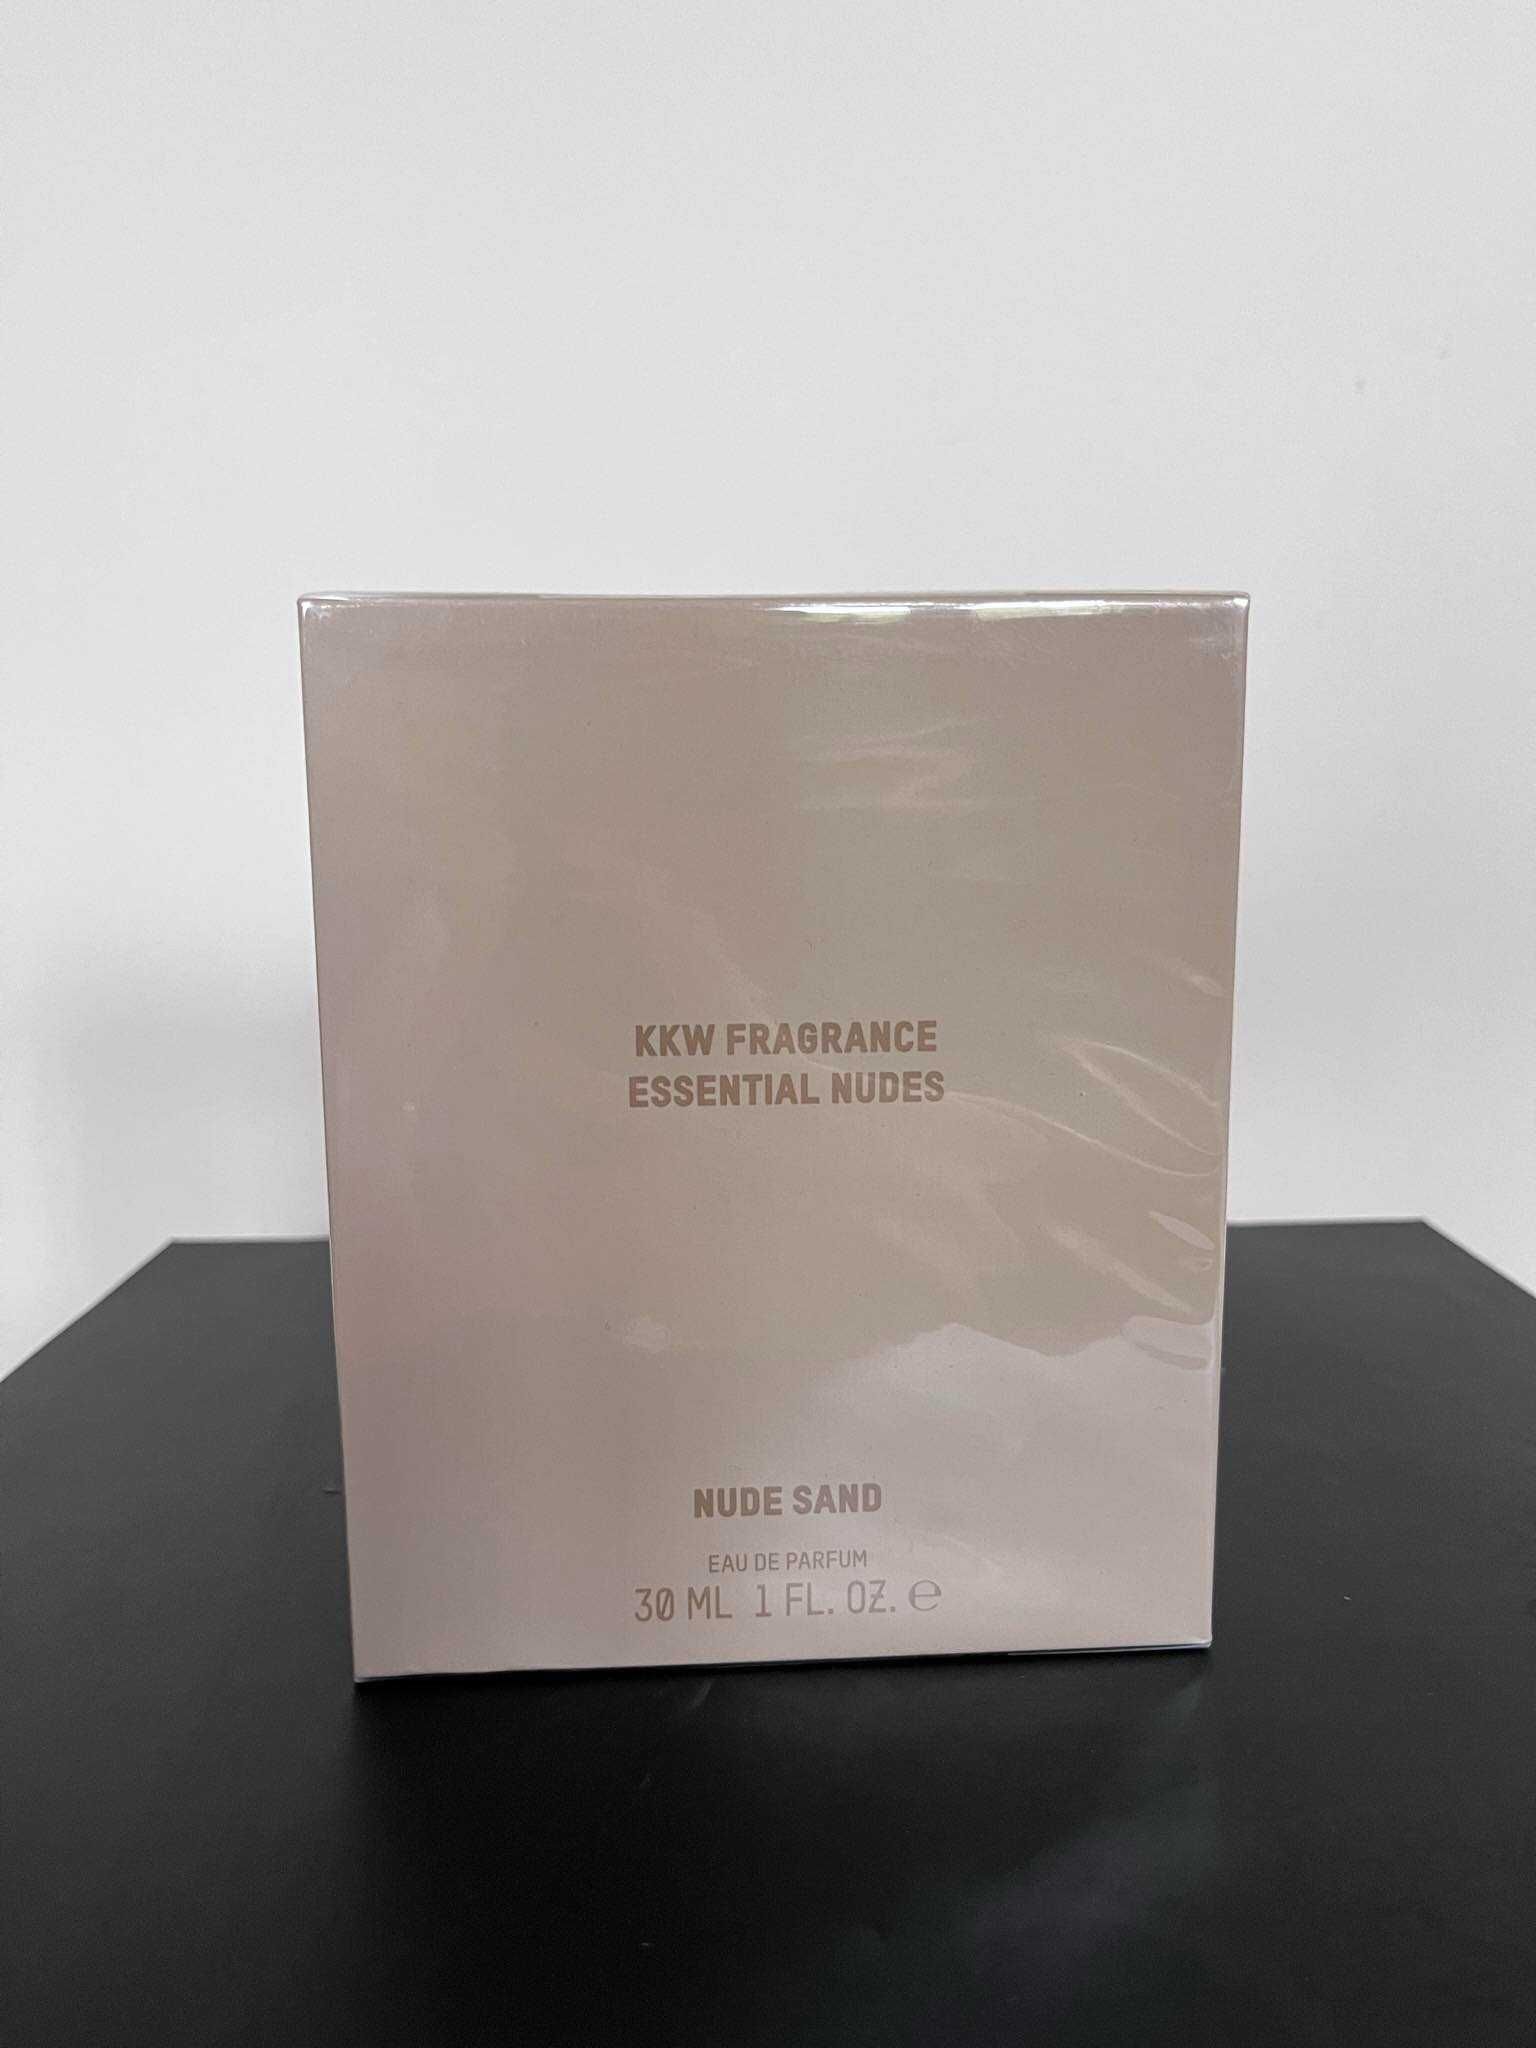 Nude Sand by KKW Fragrance Essential Nudes